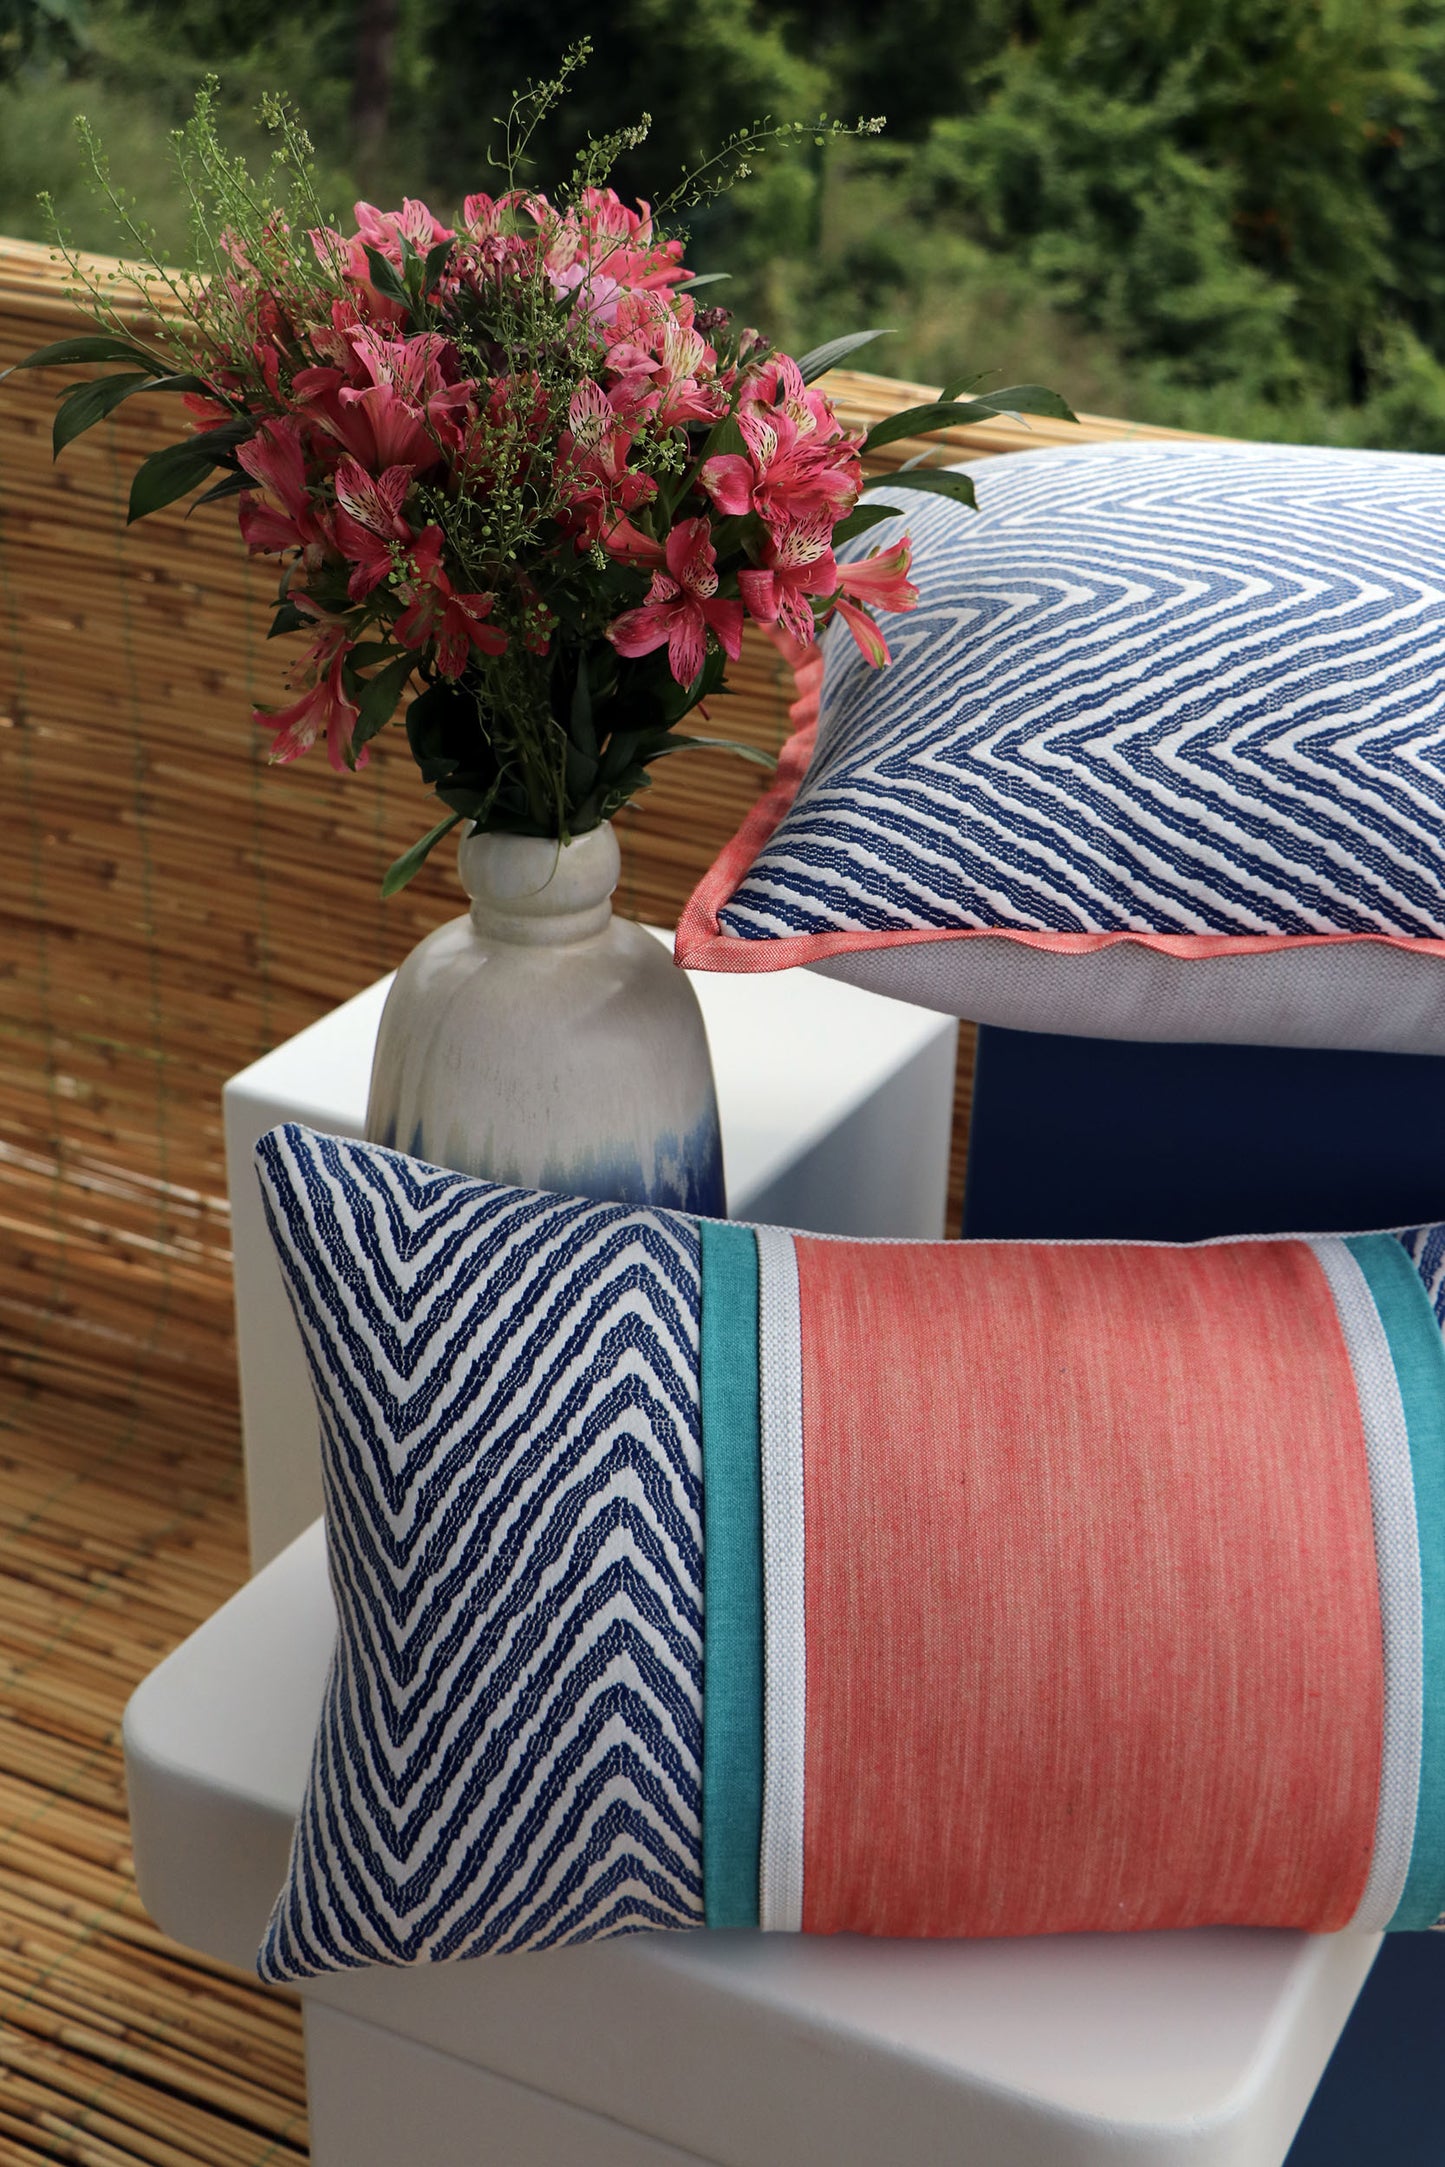 ZIGZAG PATTERNED PINK BAND DECORATIVE PILLOW